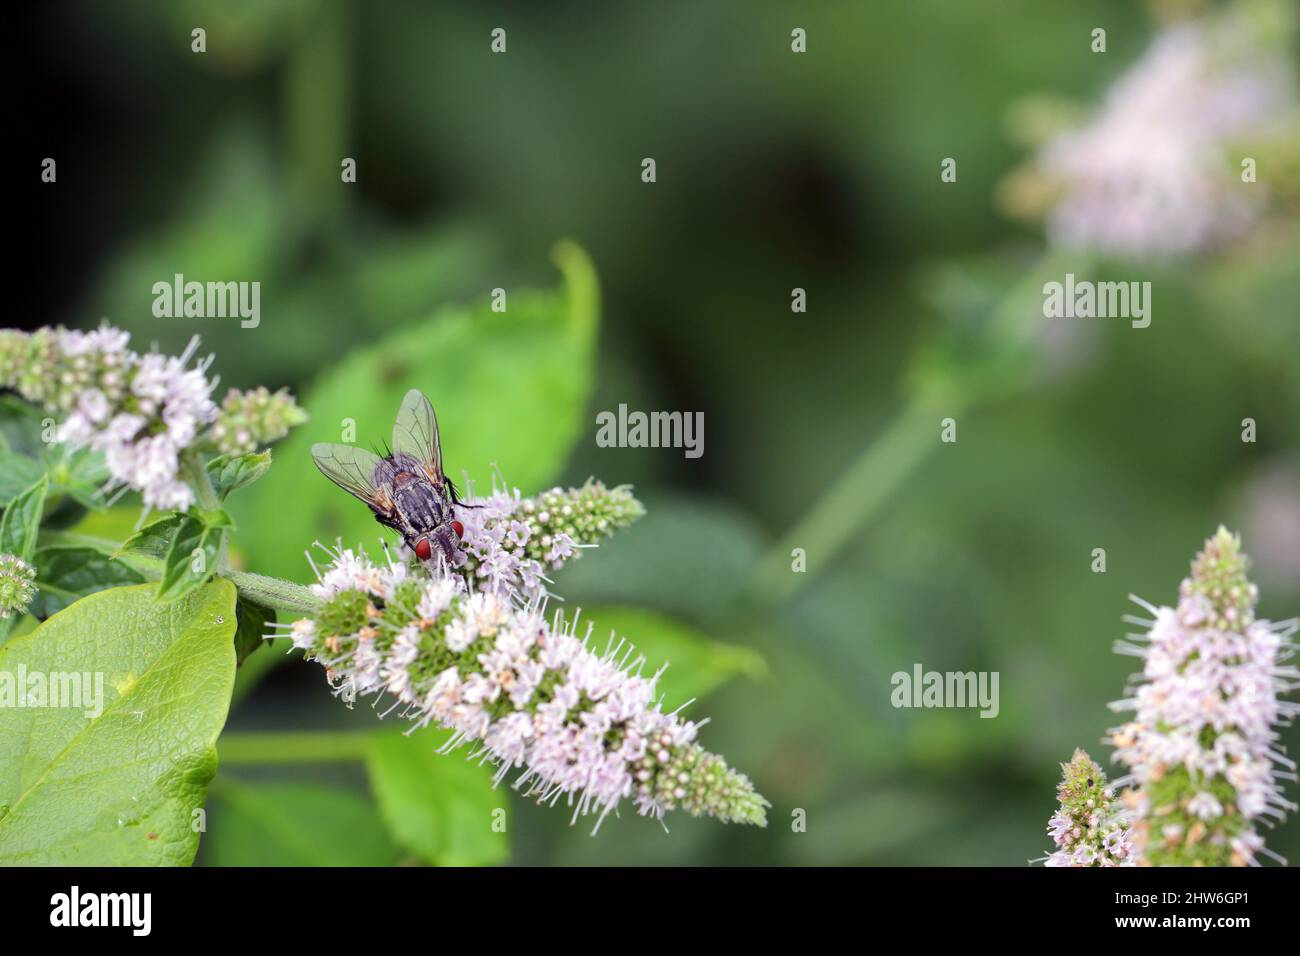 A fly feeding on pollen on mint flowers in the garden while pollinating them. Stock Photo